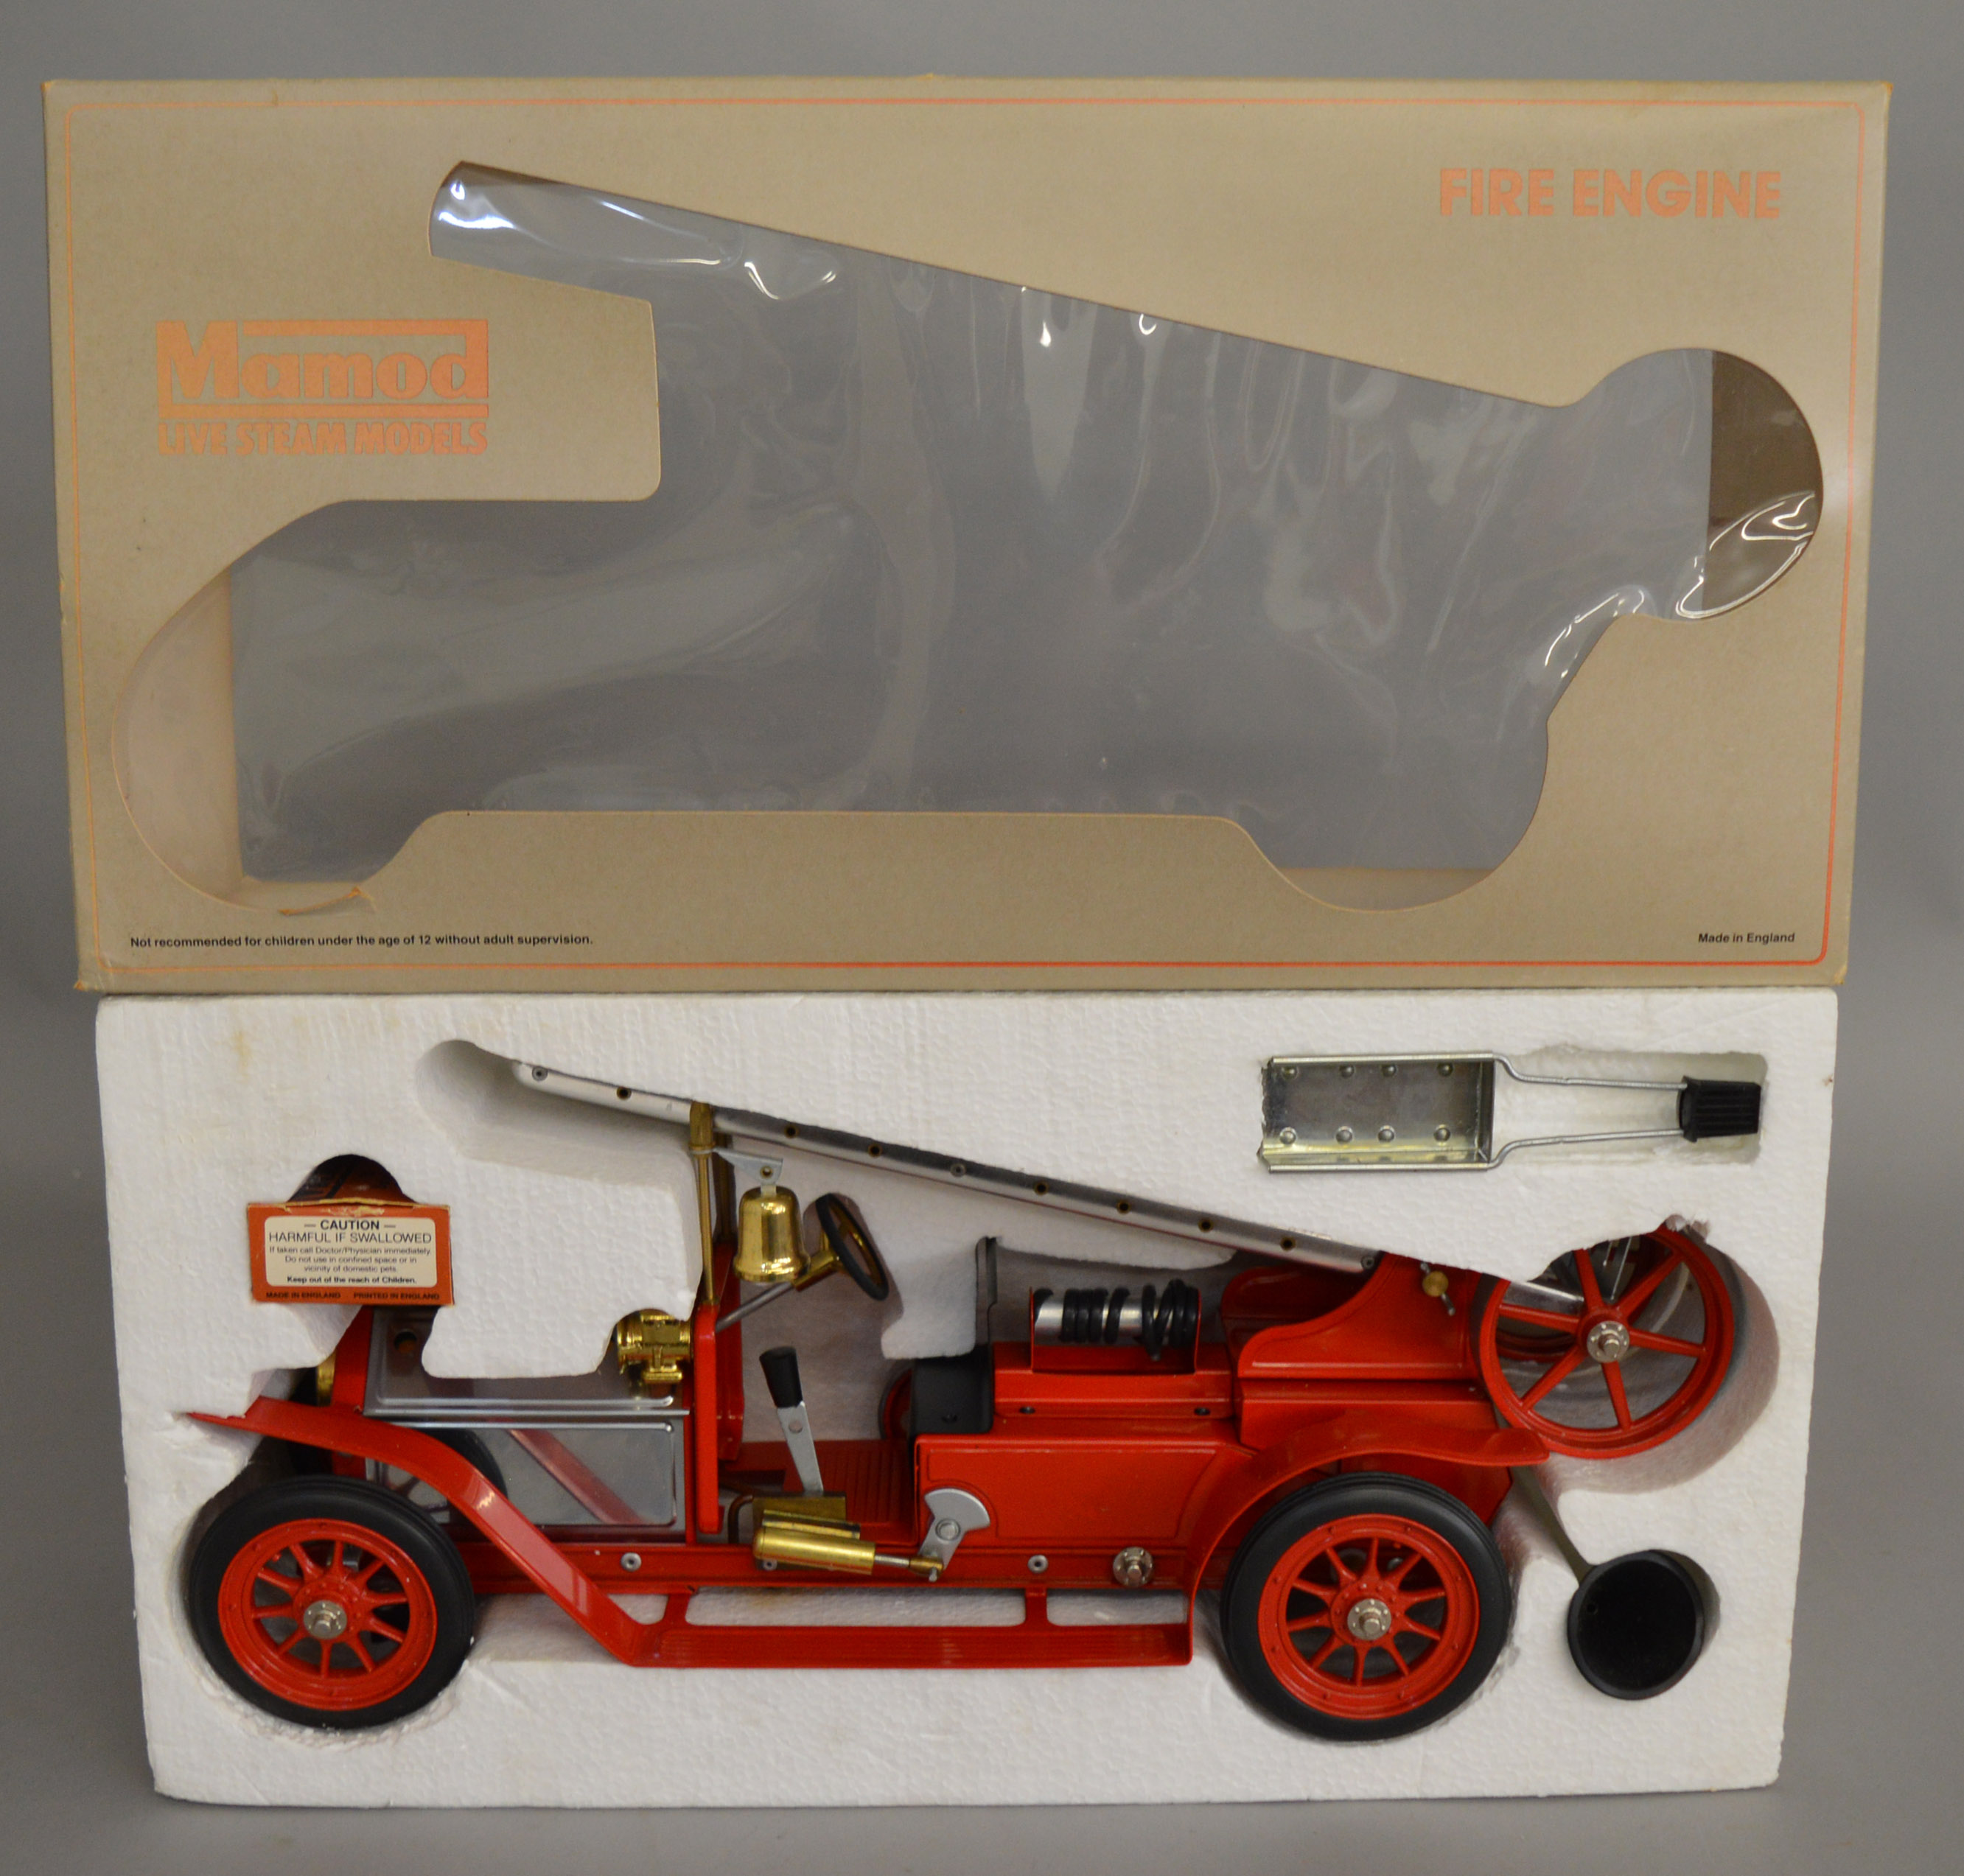 Live Steam. A Mamod FE1 vintage Fire Engine model. The model has not been fired and appears VG